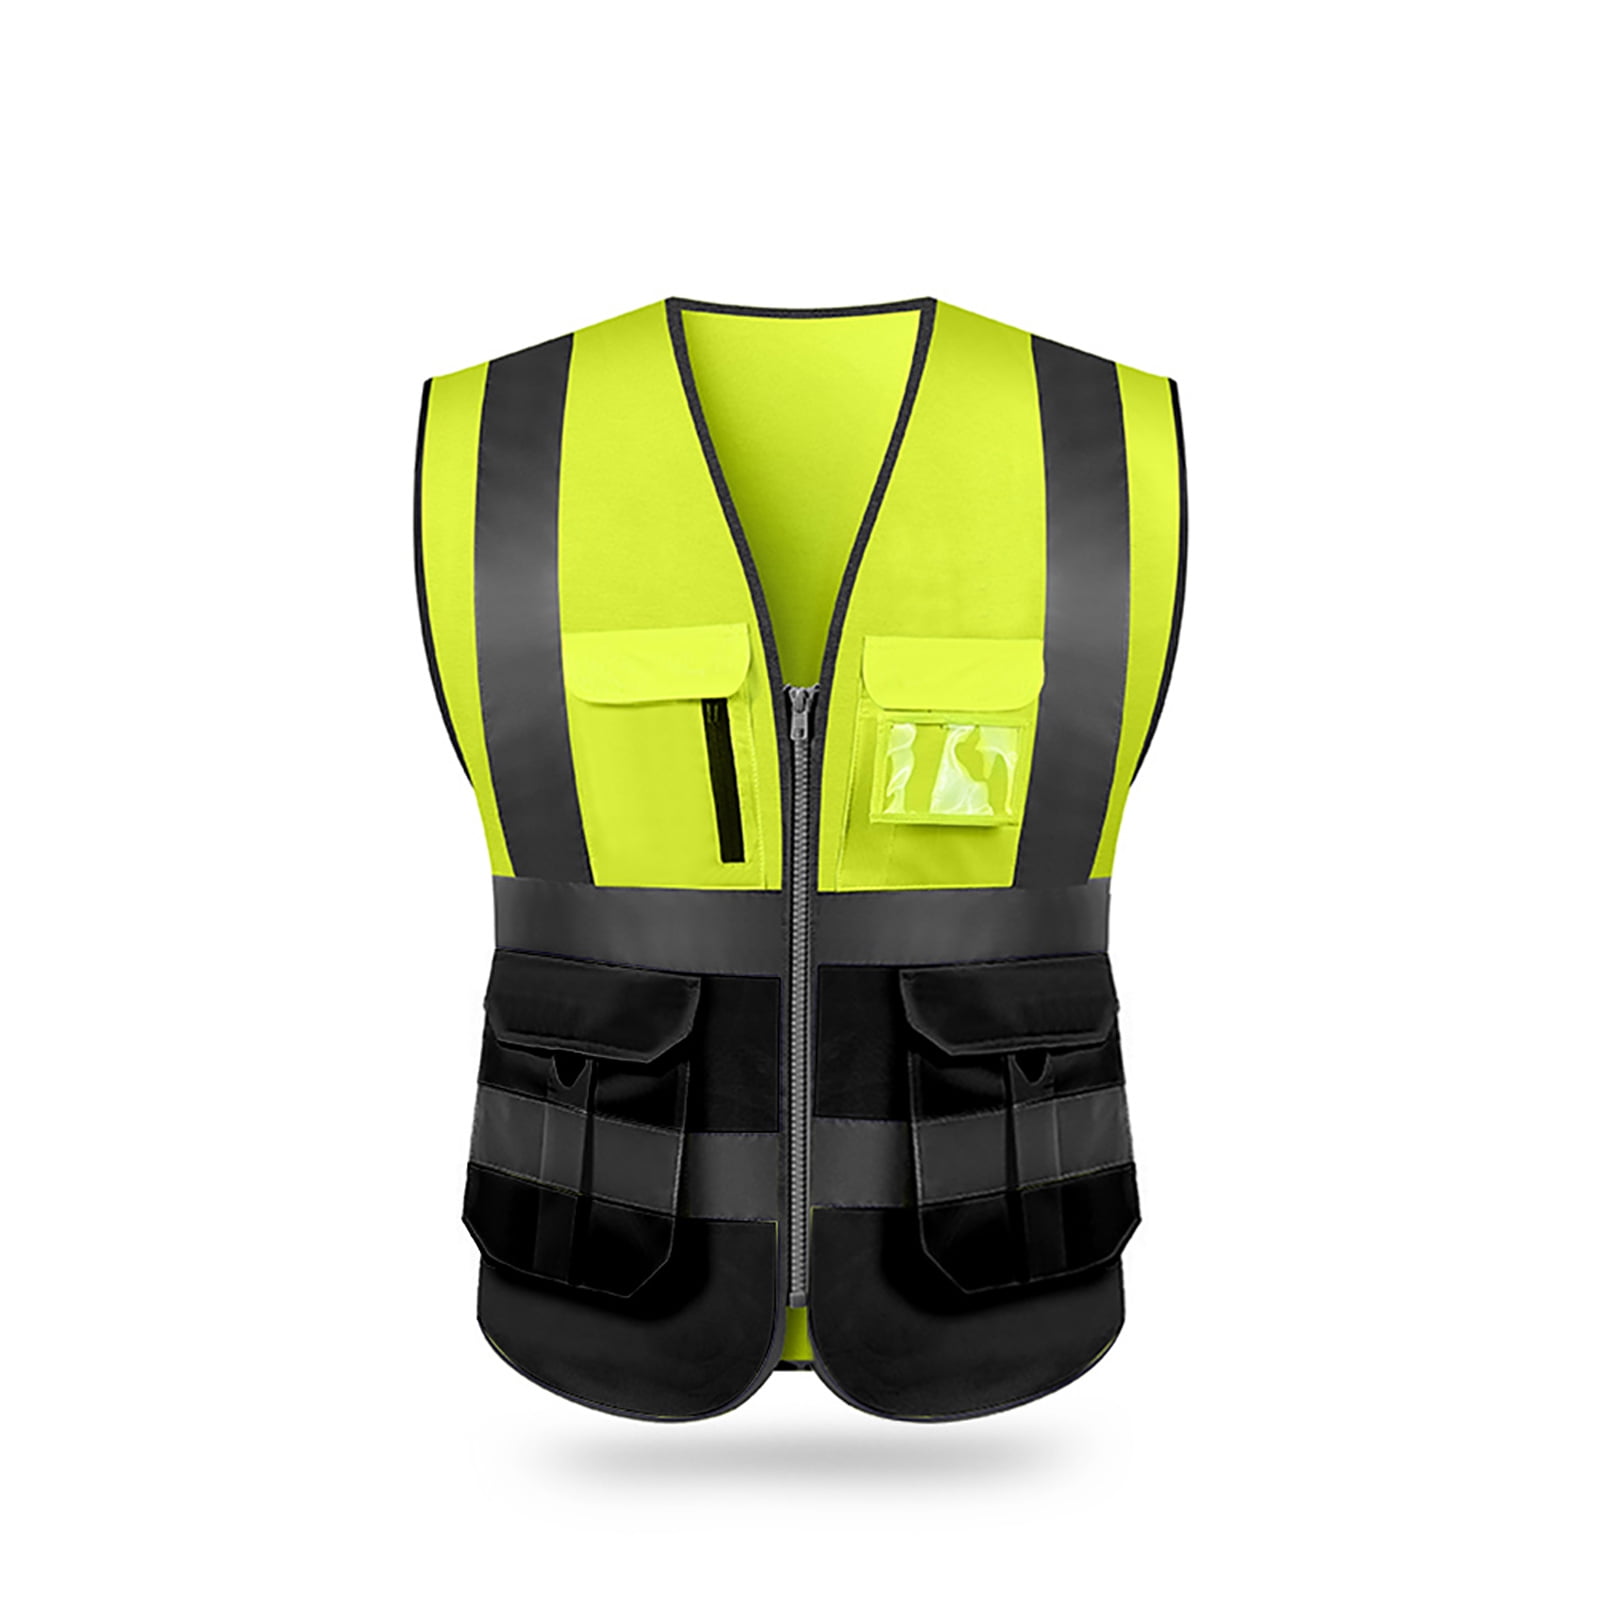 SHOOTING REFLECTIVE HI VIS CUFFS STRIPS FLUORESCENT PROTECTION STRAPS HUNTING 